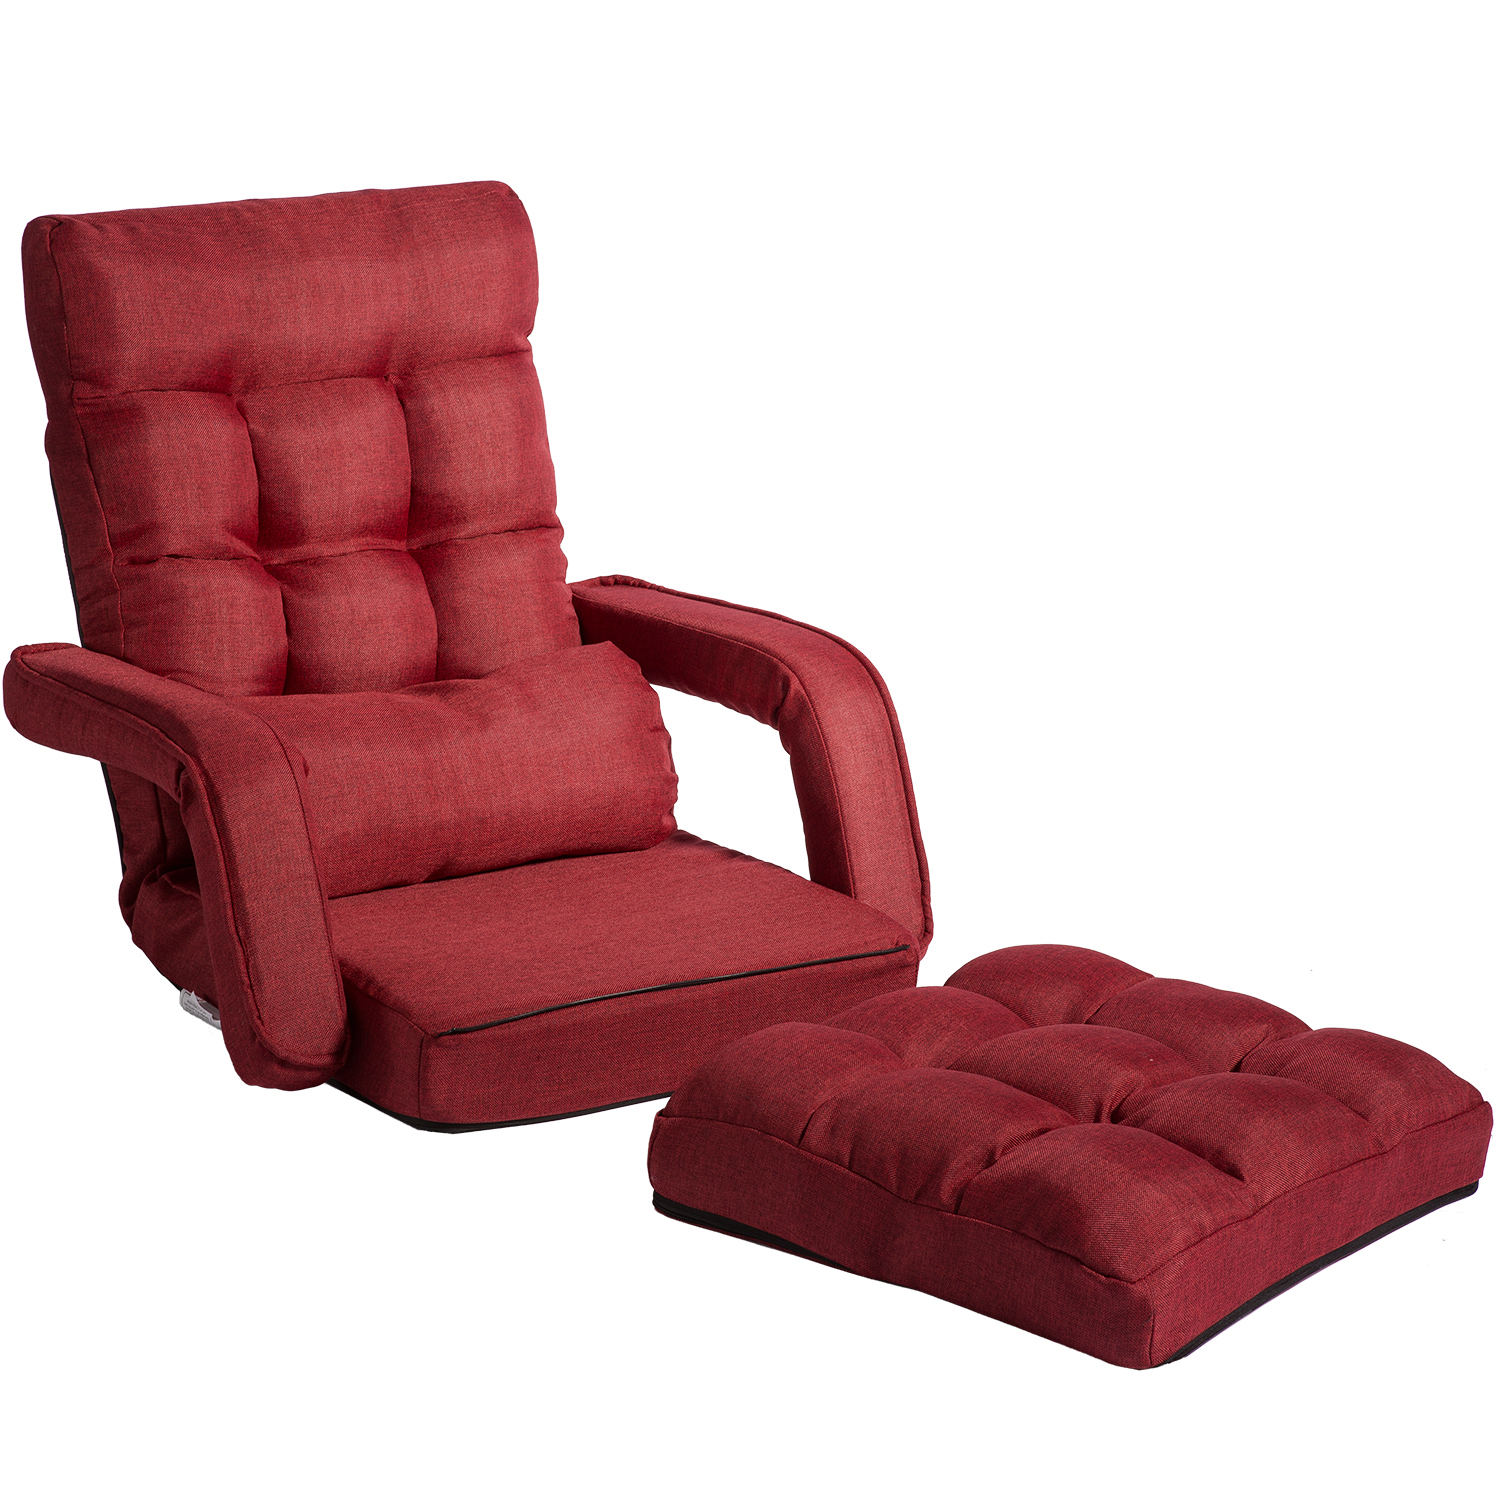 Floor Chair Set with Adjustable Backrest, Folding Chair with Armrests and a Pillow, Lazy Sofa Floor Chair Sofa Lounger Couch for Living Room Bedroom Dorm Office, No Assembly Required, Red, Q6294 - image 1 of 10